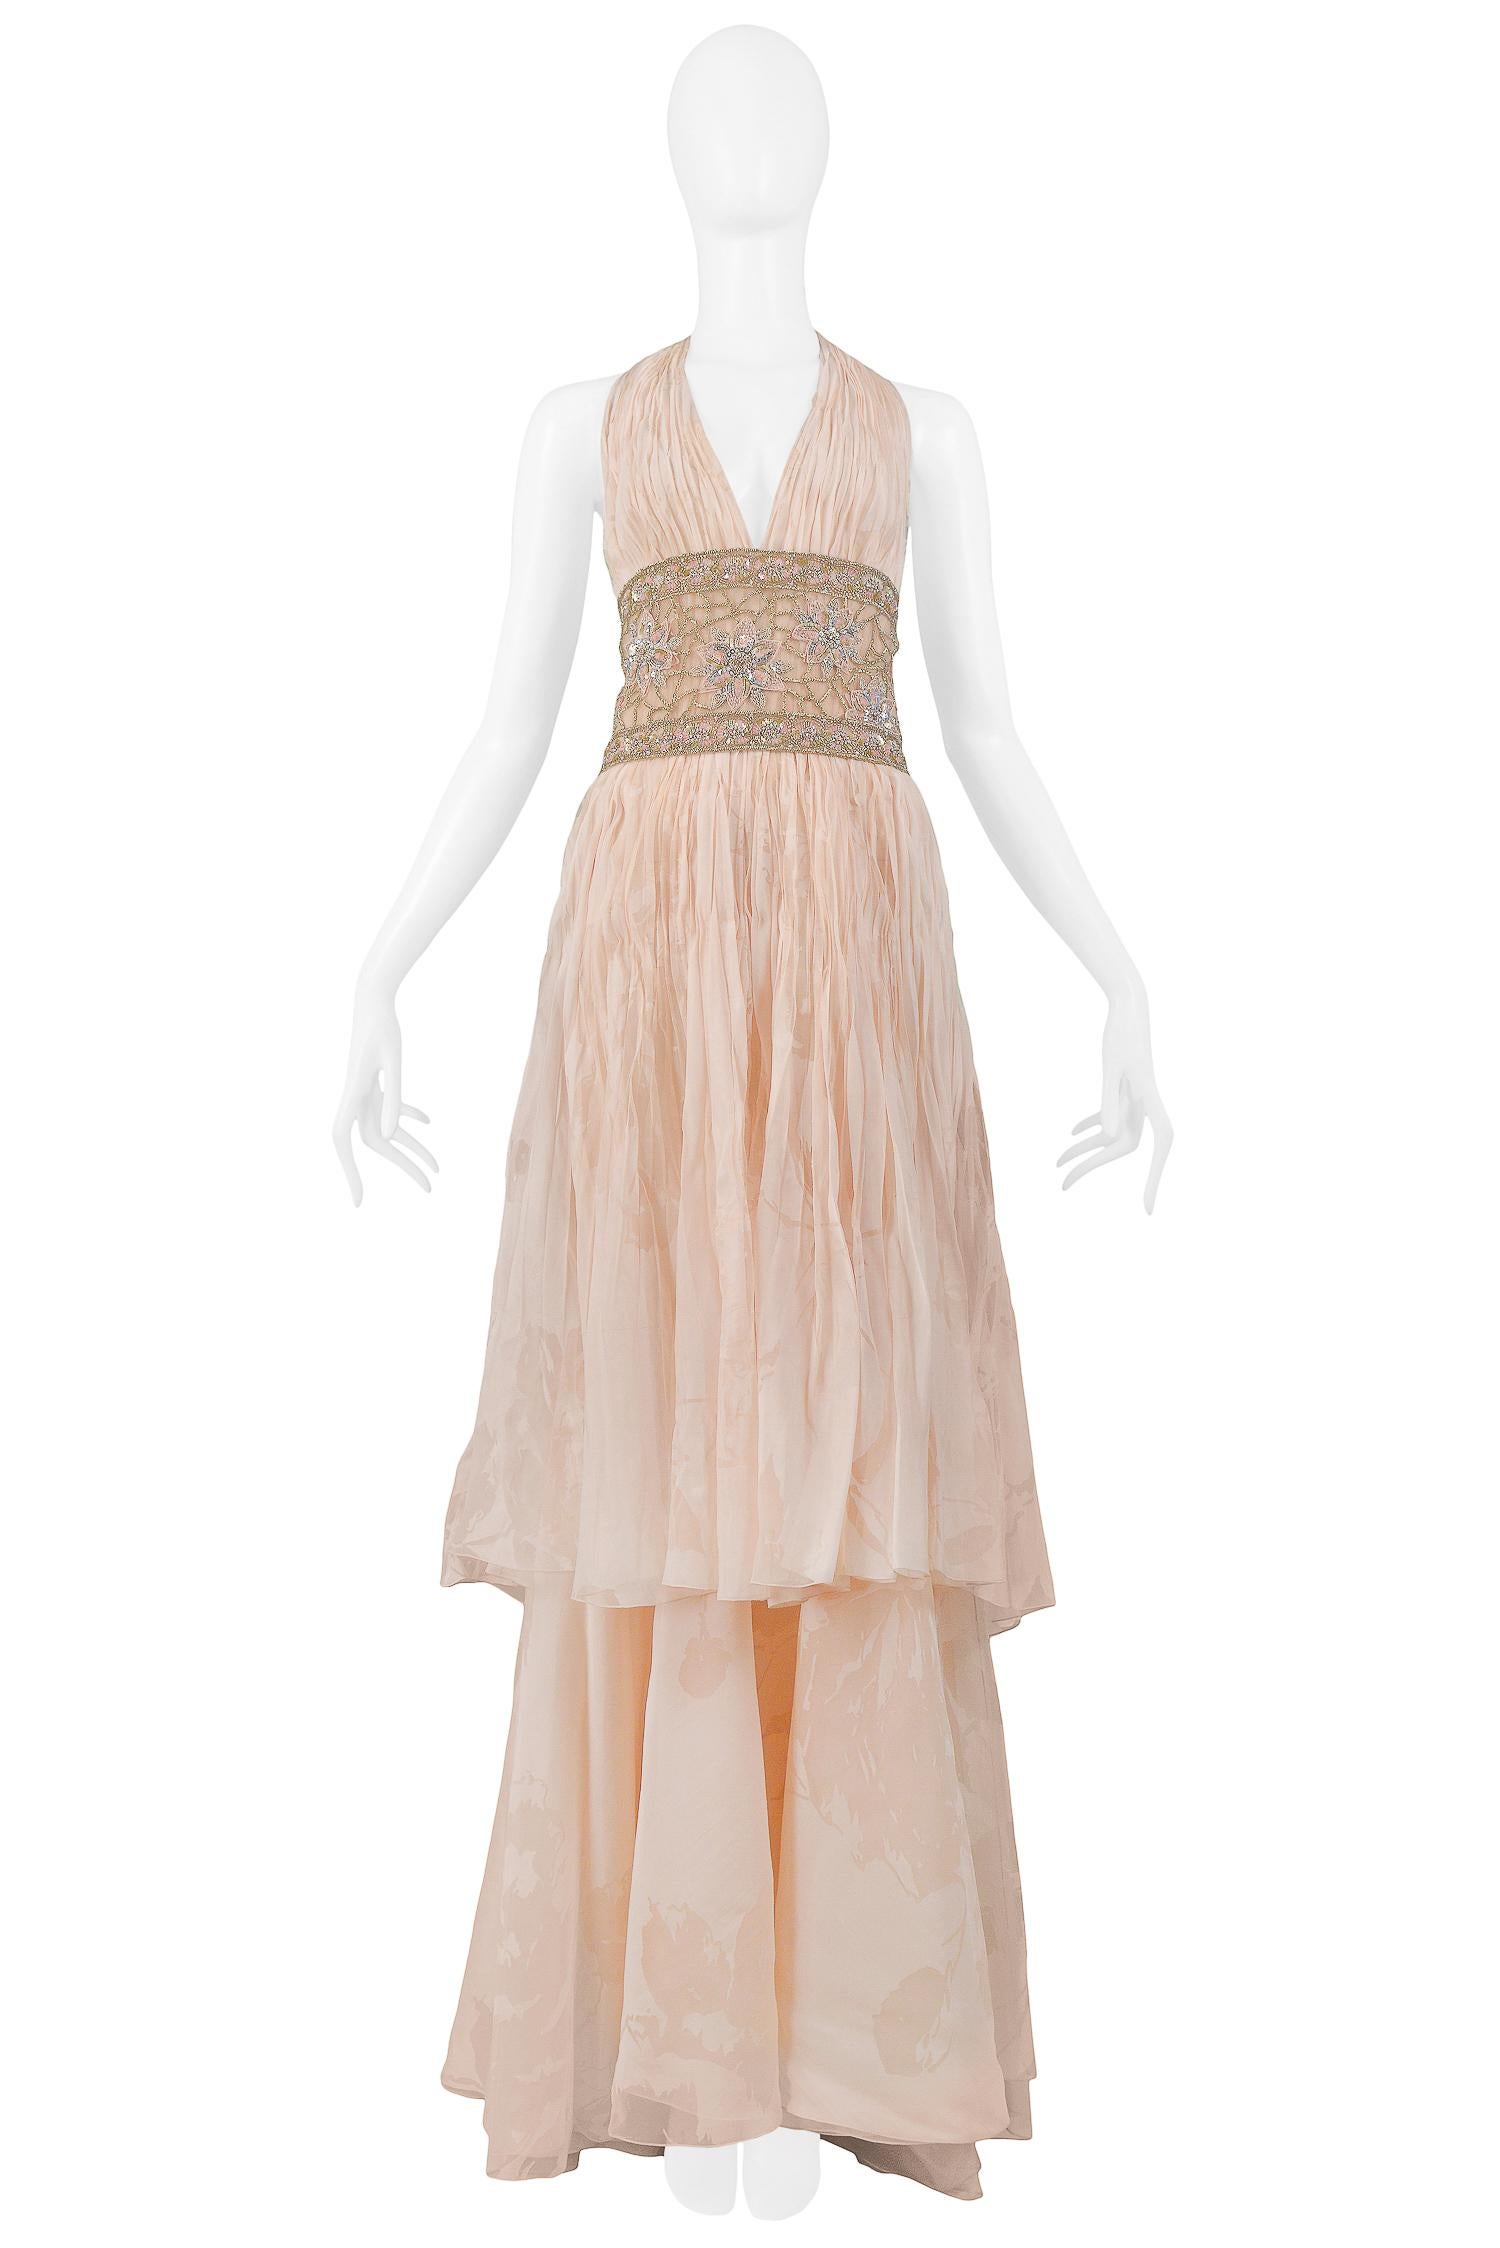 We are excited to offer a vintage Valentino peach pink floral silk runway gown. The gown is 100% silk and features a halter style V-neckline with accordion pleating,  two-tiered skirt, slight train, a side zip closure, and a handmade gold and silver